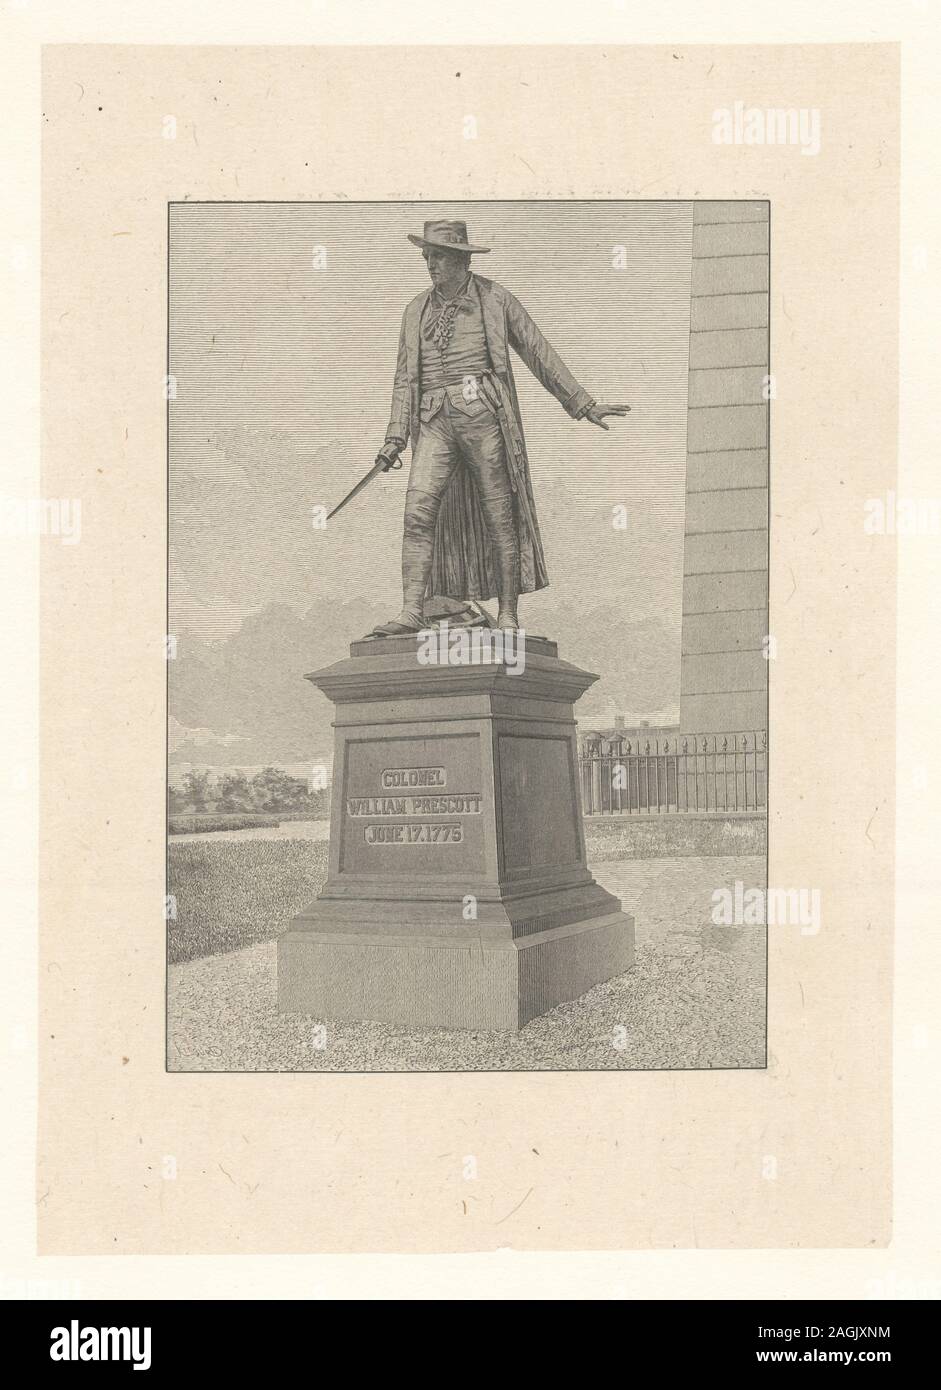 Printmakers include J.B. Forrest, J.N. Gimbrede, H.B. Hall and John Hill. Title from Calendar of the Emmet Collection. EM8091; Monument to Colonel William Prescott Stock Photo